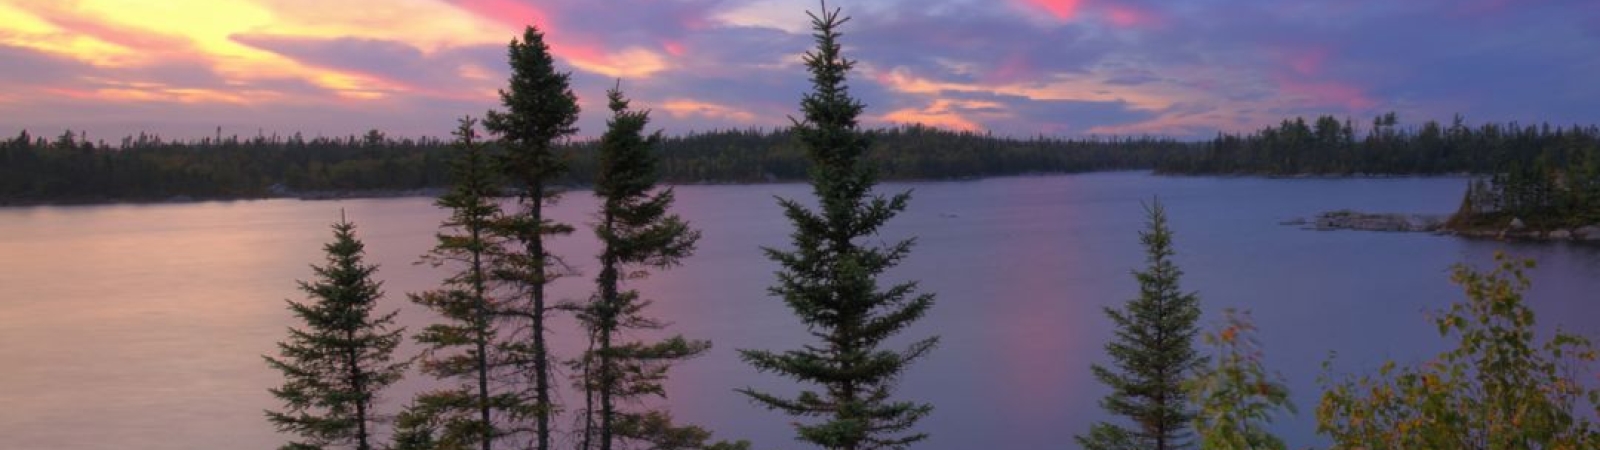 a lake surrounded by trees and rocks at sunset